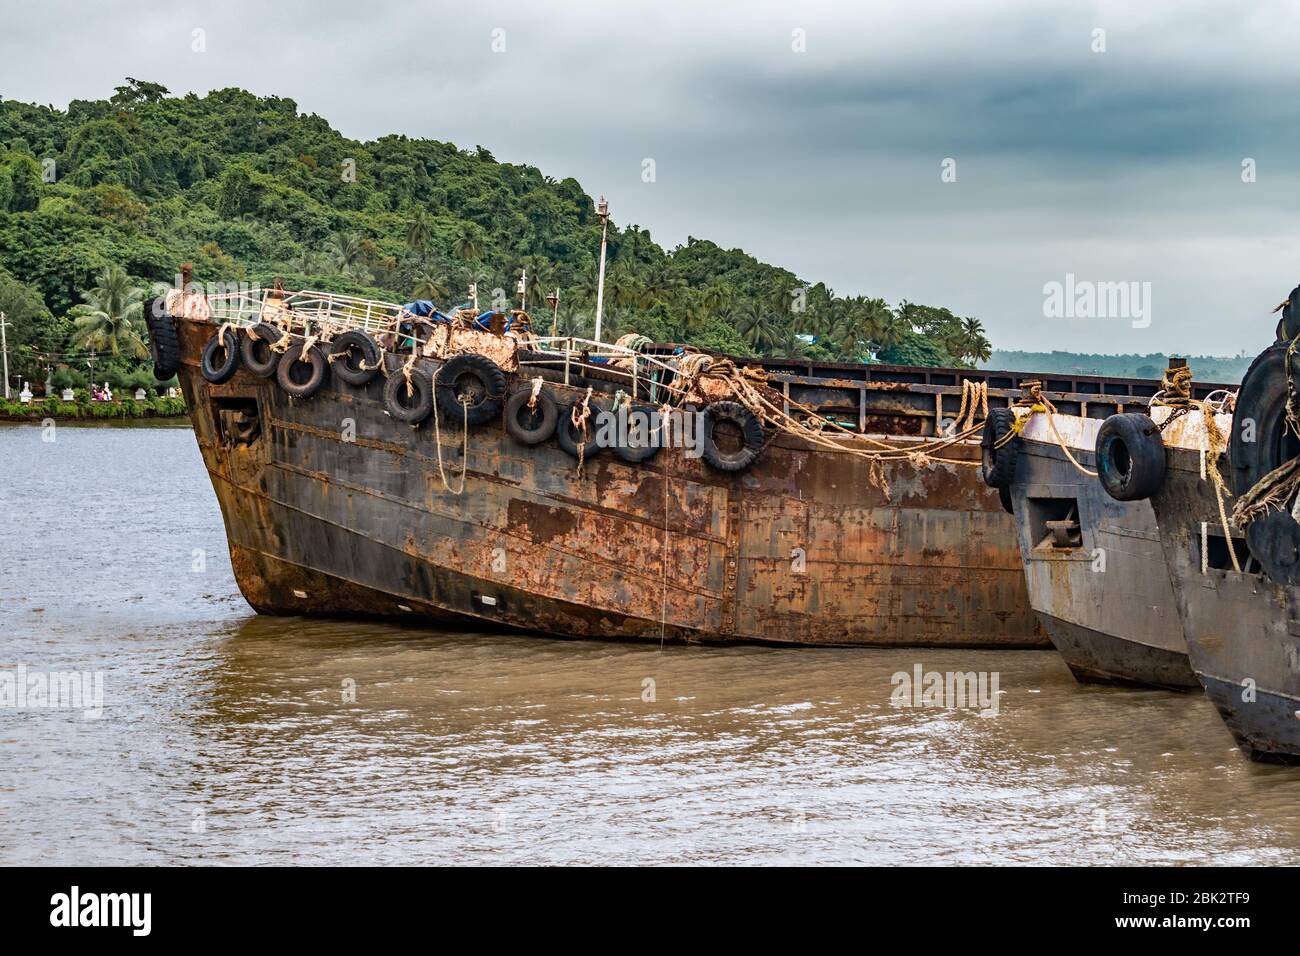 Decommissioned Feeder Vessels aka Barges beached up at Ship Breaking Yard. Used for bulks transportation, now obsolete due to recession and mining ban Stock Photo